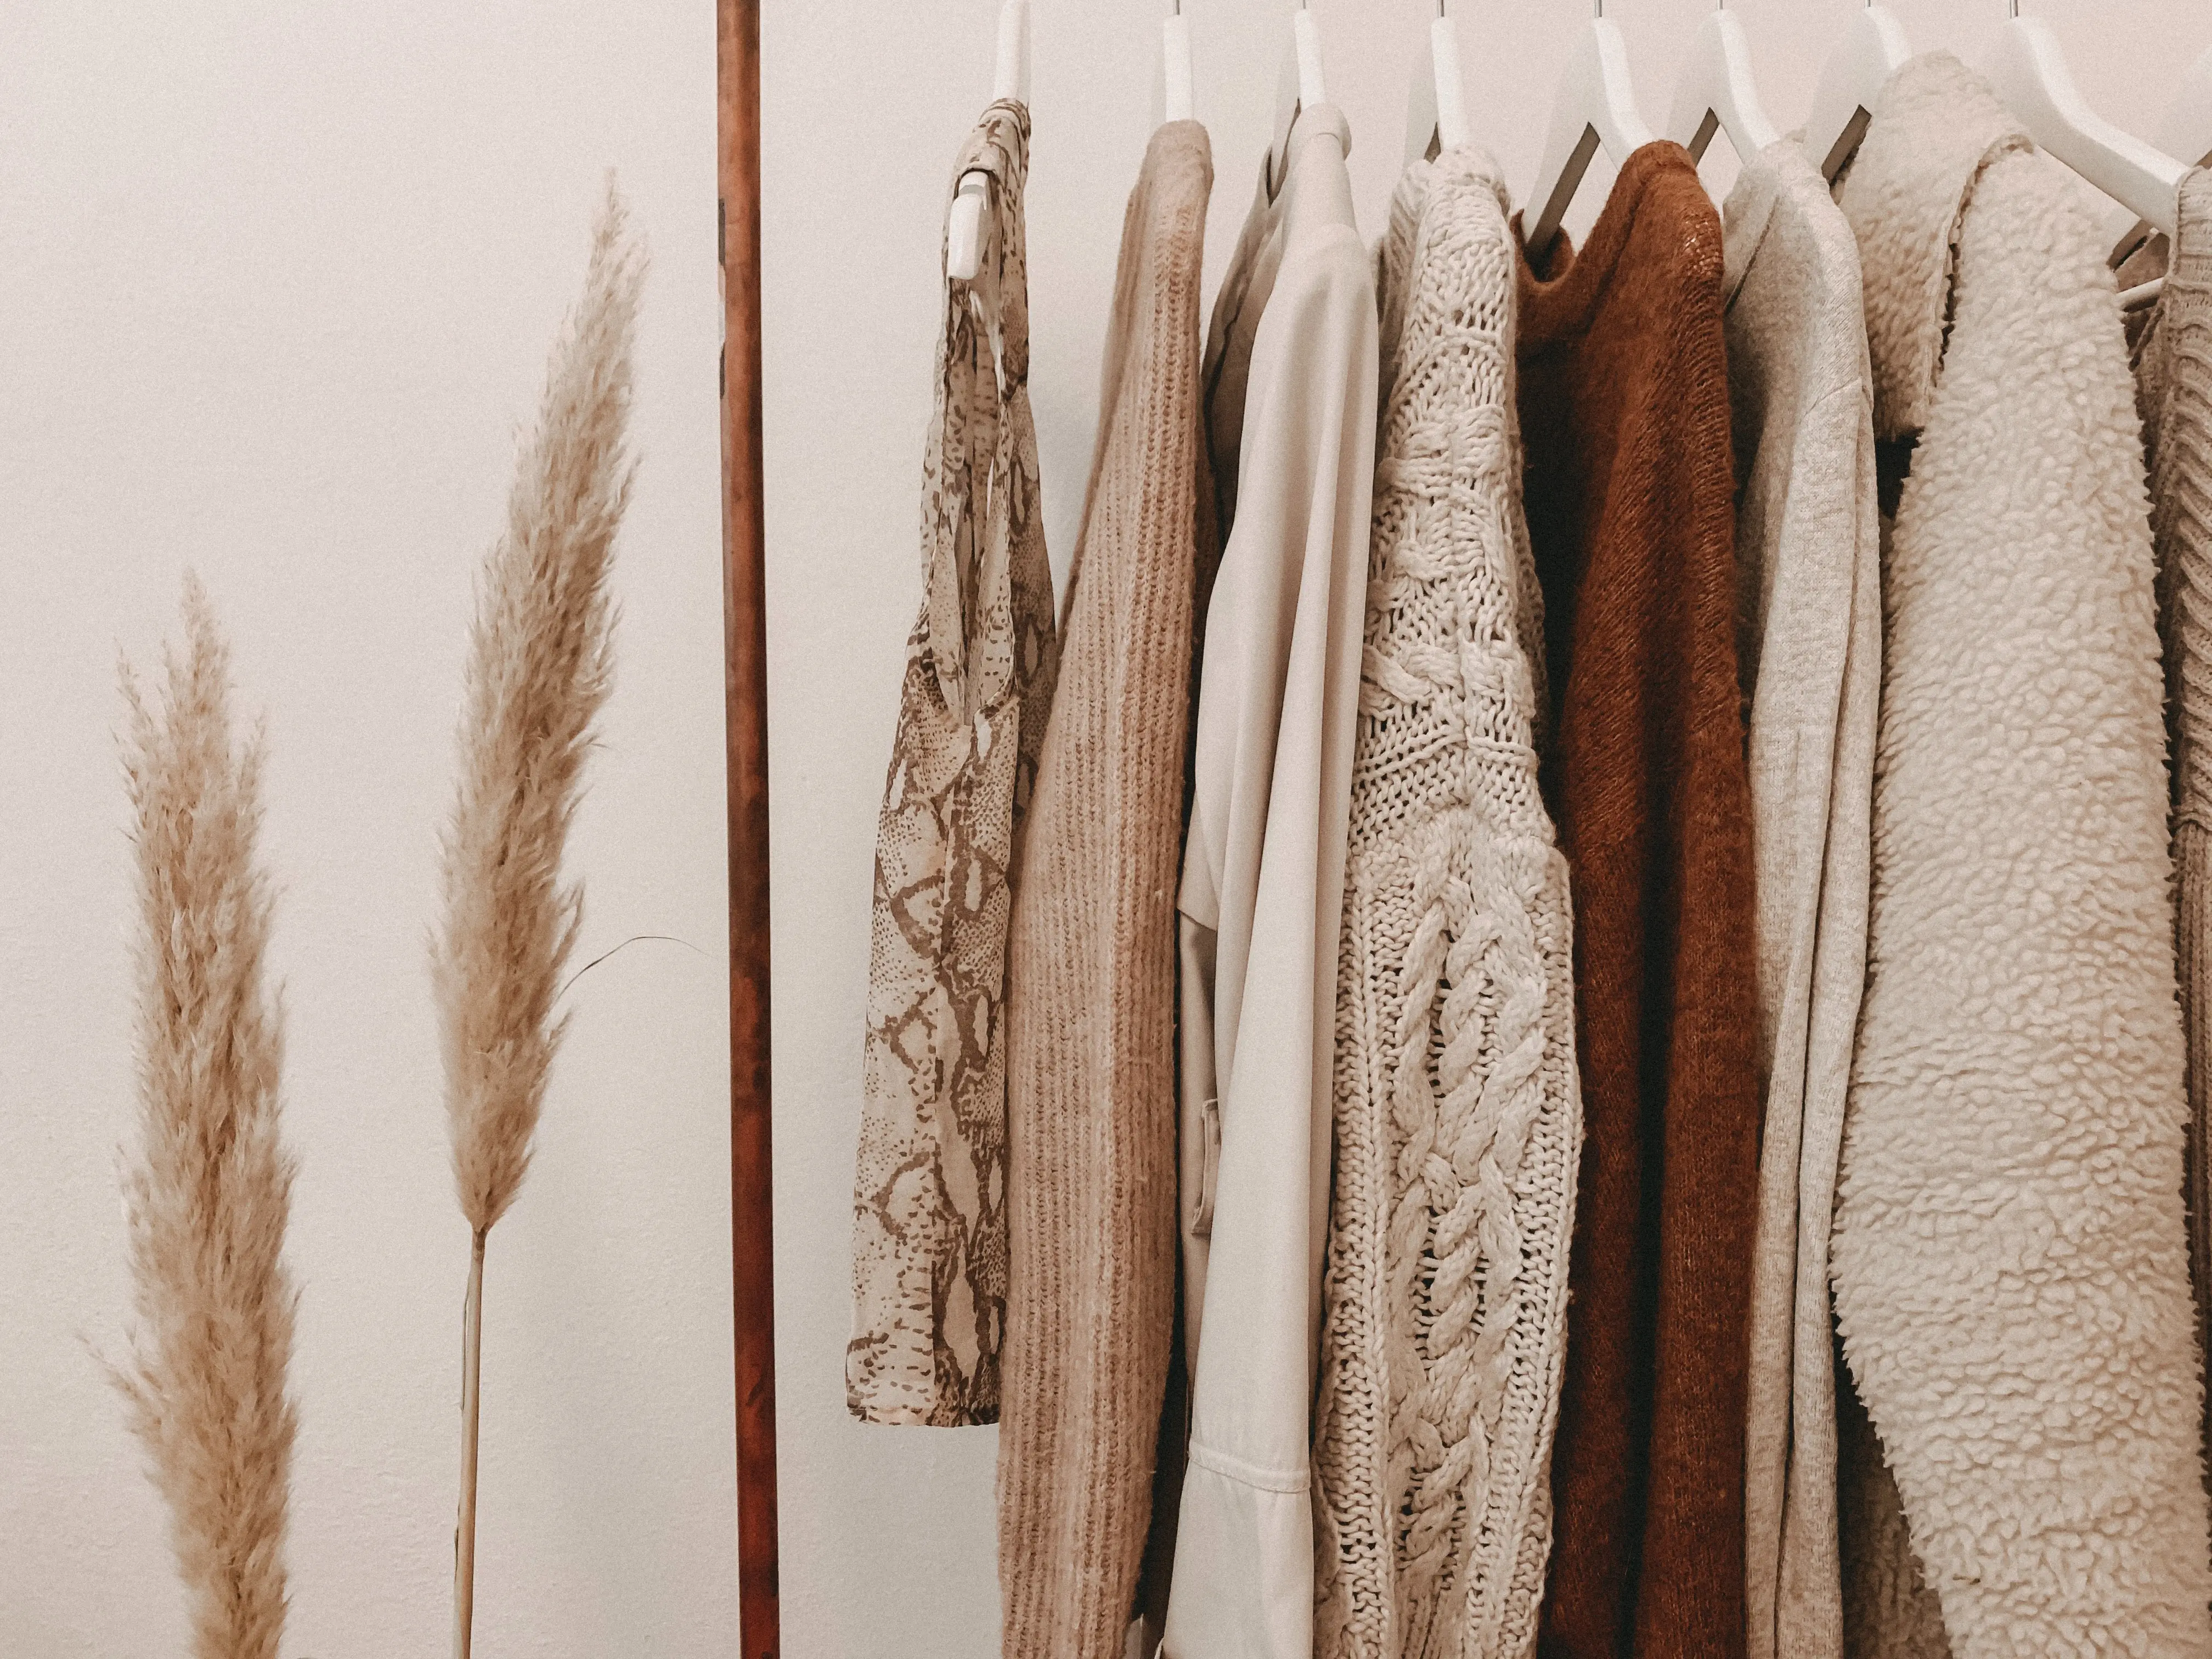 How to build a capsule wardrobe, NOT from scratch